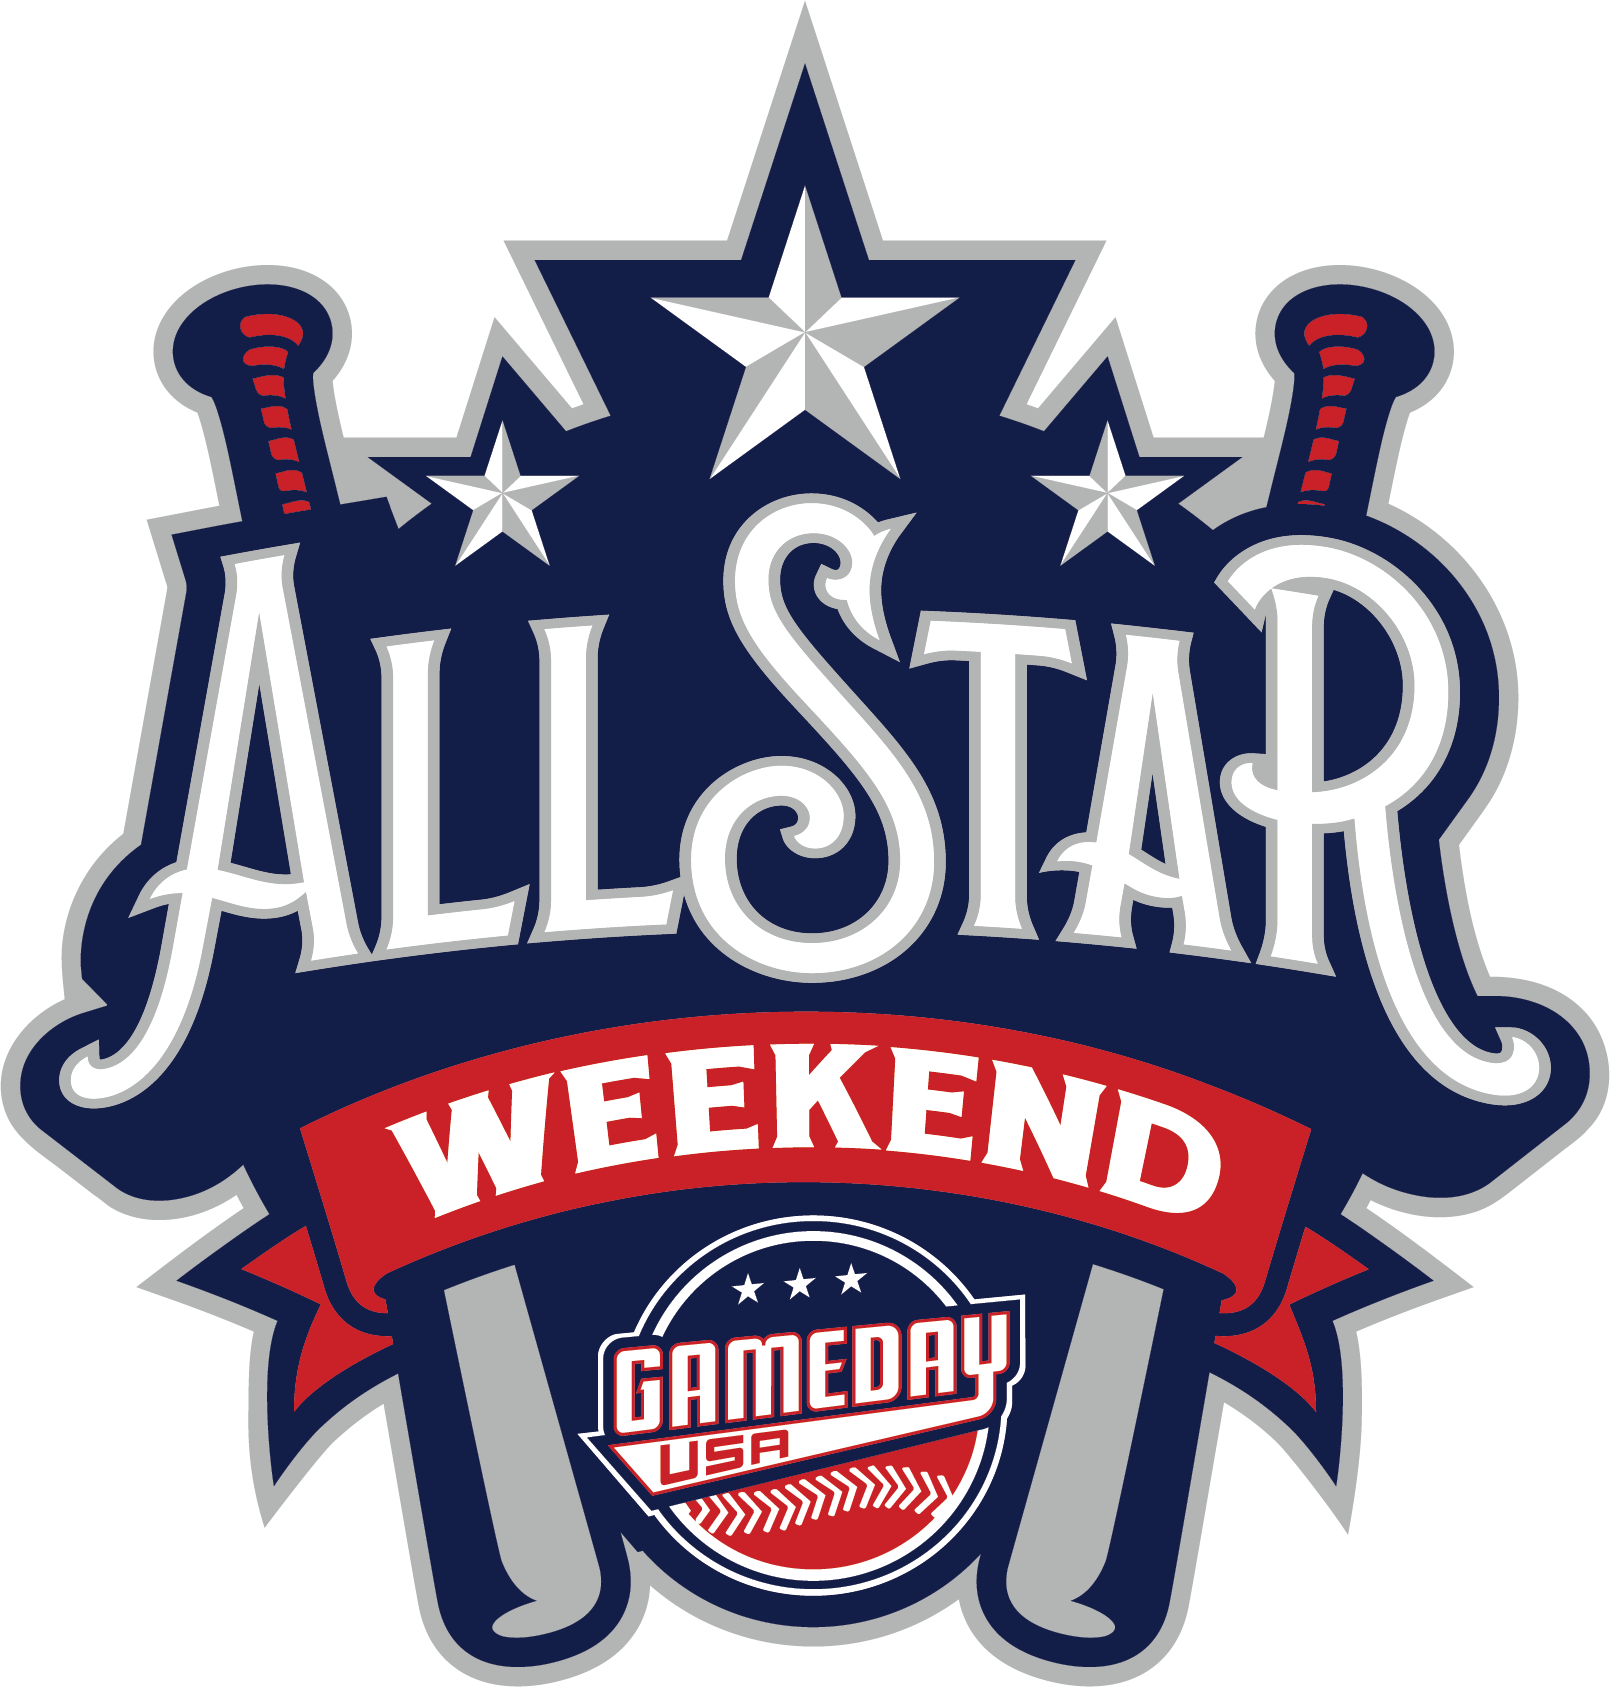 ALL-STAR WEEKEND - INDIANAPOLIS AREA